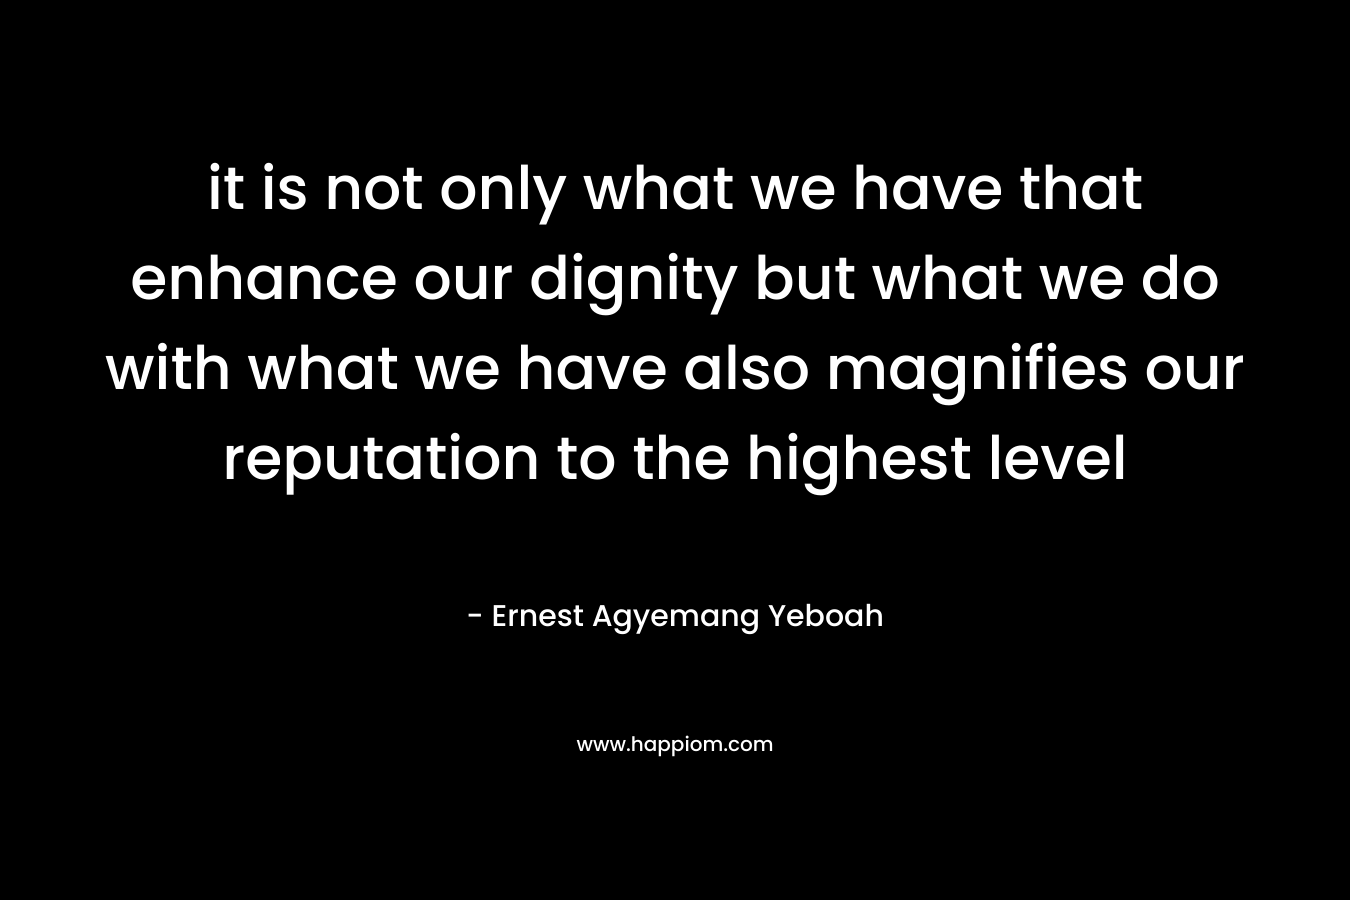 it is not only what we have that enhance our dignity but what we do with what we have also magnifies our reputation to the highest level – Ernest Agyemang Yeboah